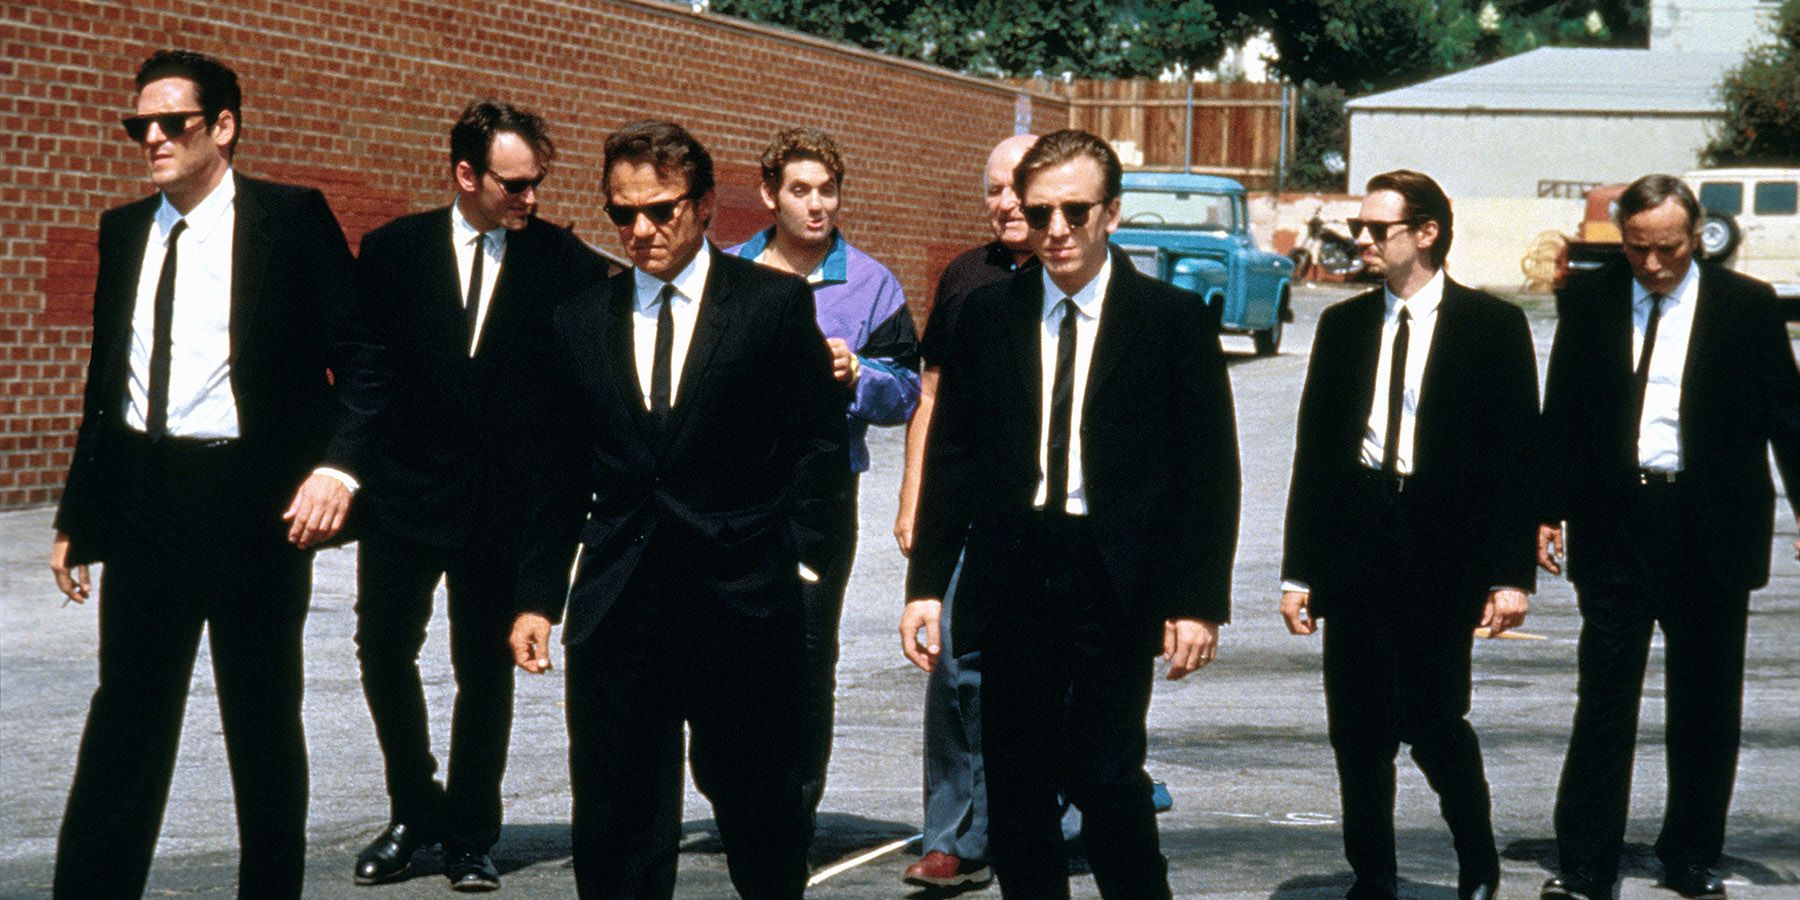 The cast of Reservoir Dogs in suits and sunglasses